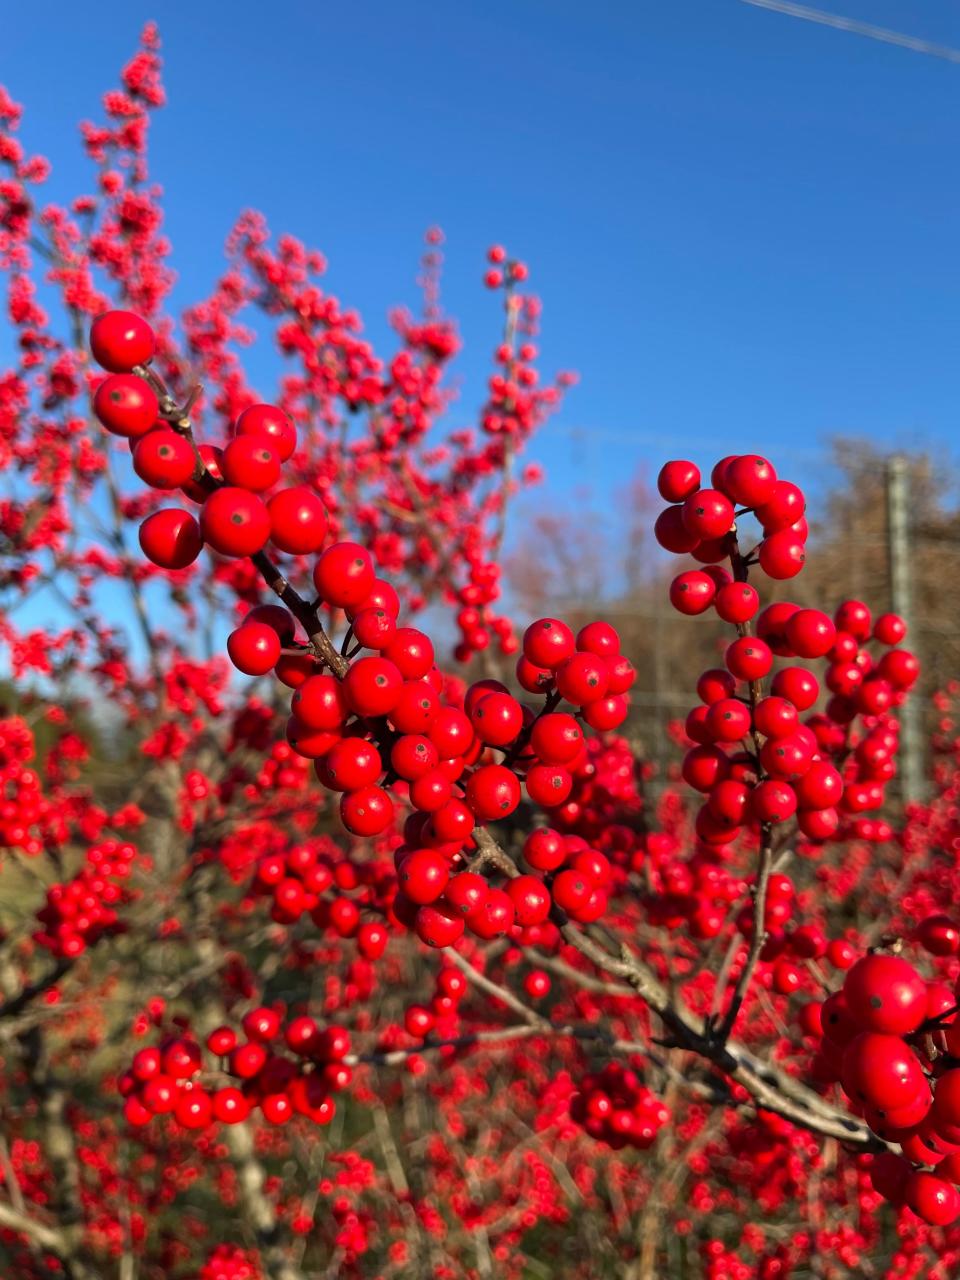 Winterberry Holly (Ilex verticillata) is a North American native shrub known for brilliant fall and winter berries. Red is the most common form but orange and yellow varieties are available. Winter Red (red), Winter Gold (orange), Goldfinch (yellow).